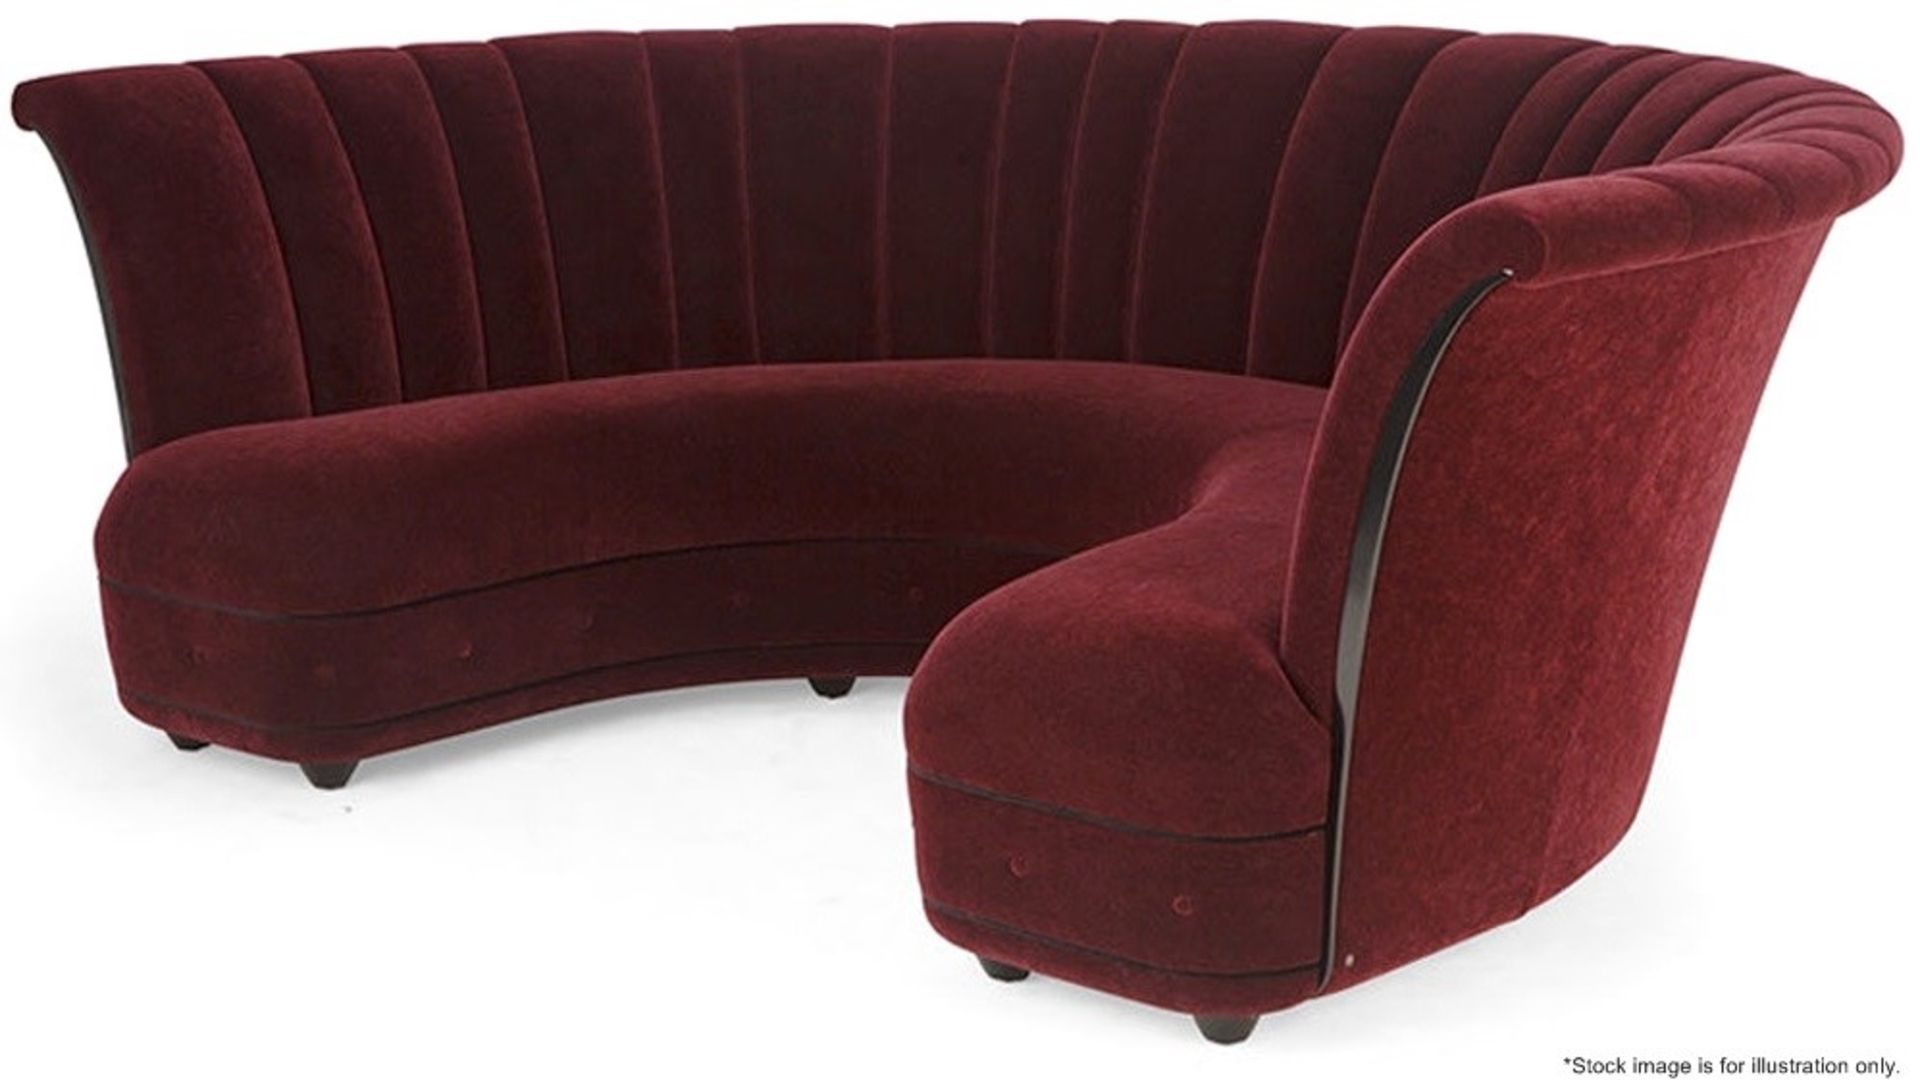 1 x Christopher Guy 'Ditto' Horseshoe-Shaped Dining Room Banquette Sofa Seating, In Burgundy Velvet